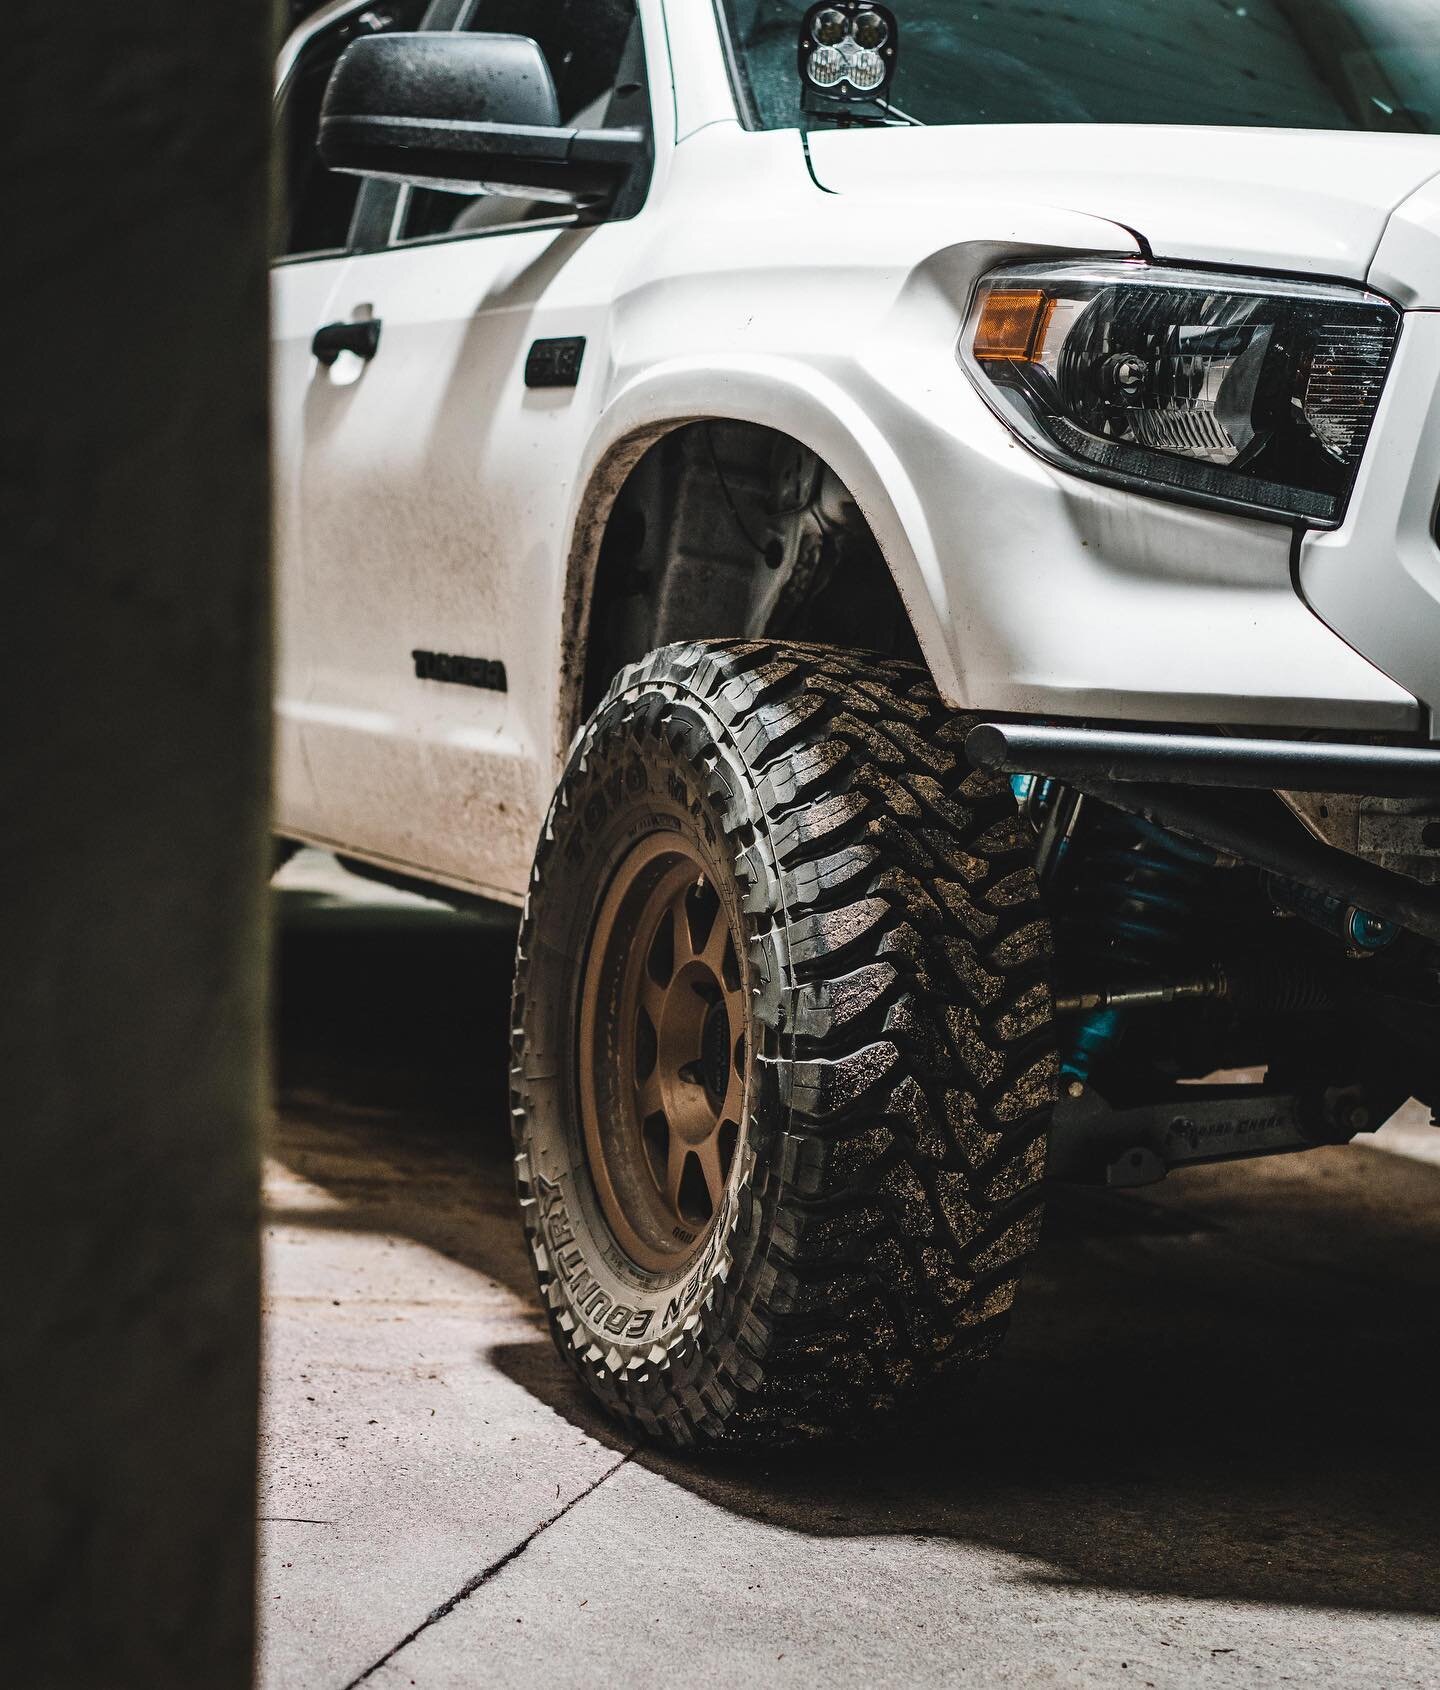 Already put these Toyo MTs through every terrain out there. Sand, snow, mud, and even rocky terrain were no match for these. Definitely recommend this tire, I&rsquo;m sure others perform well but so far these MTs are solid!
-
#notasponsoredpost
@team